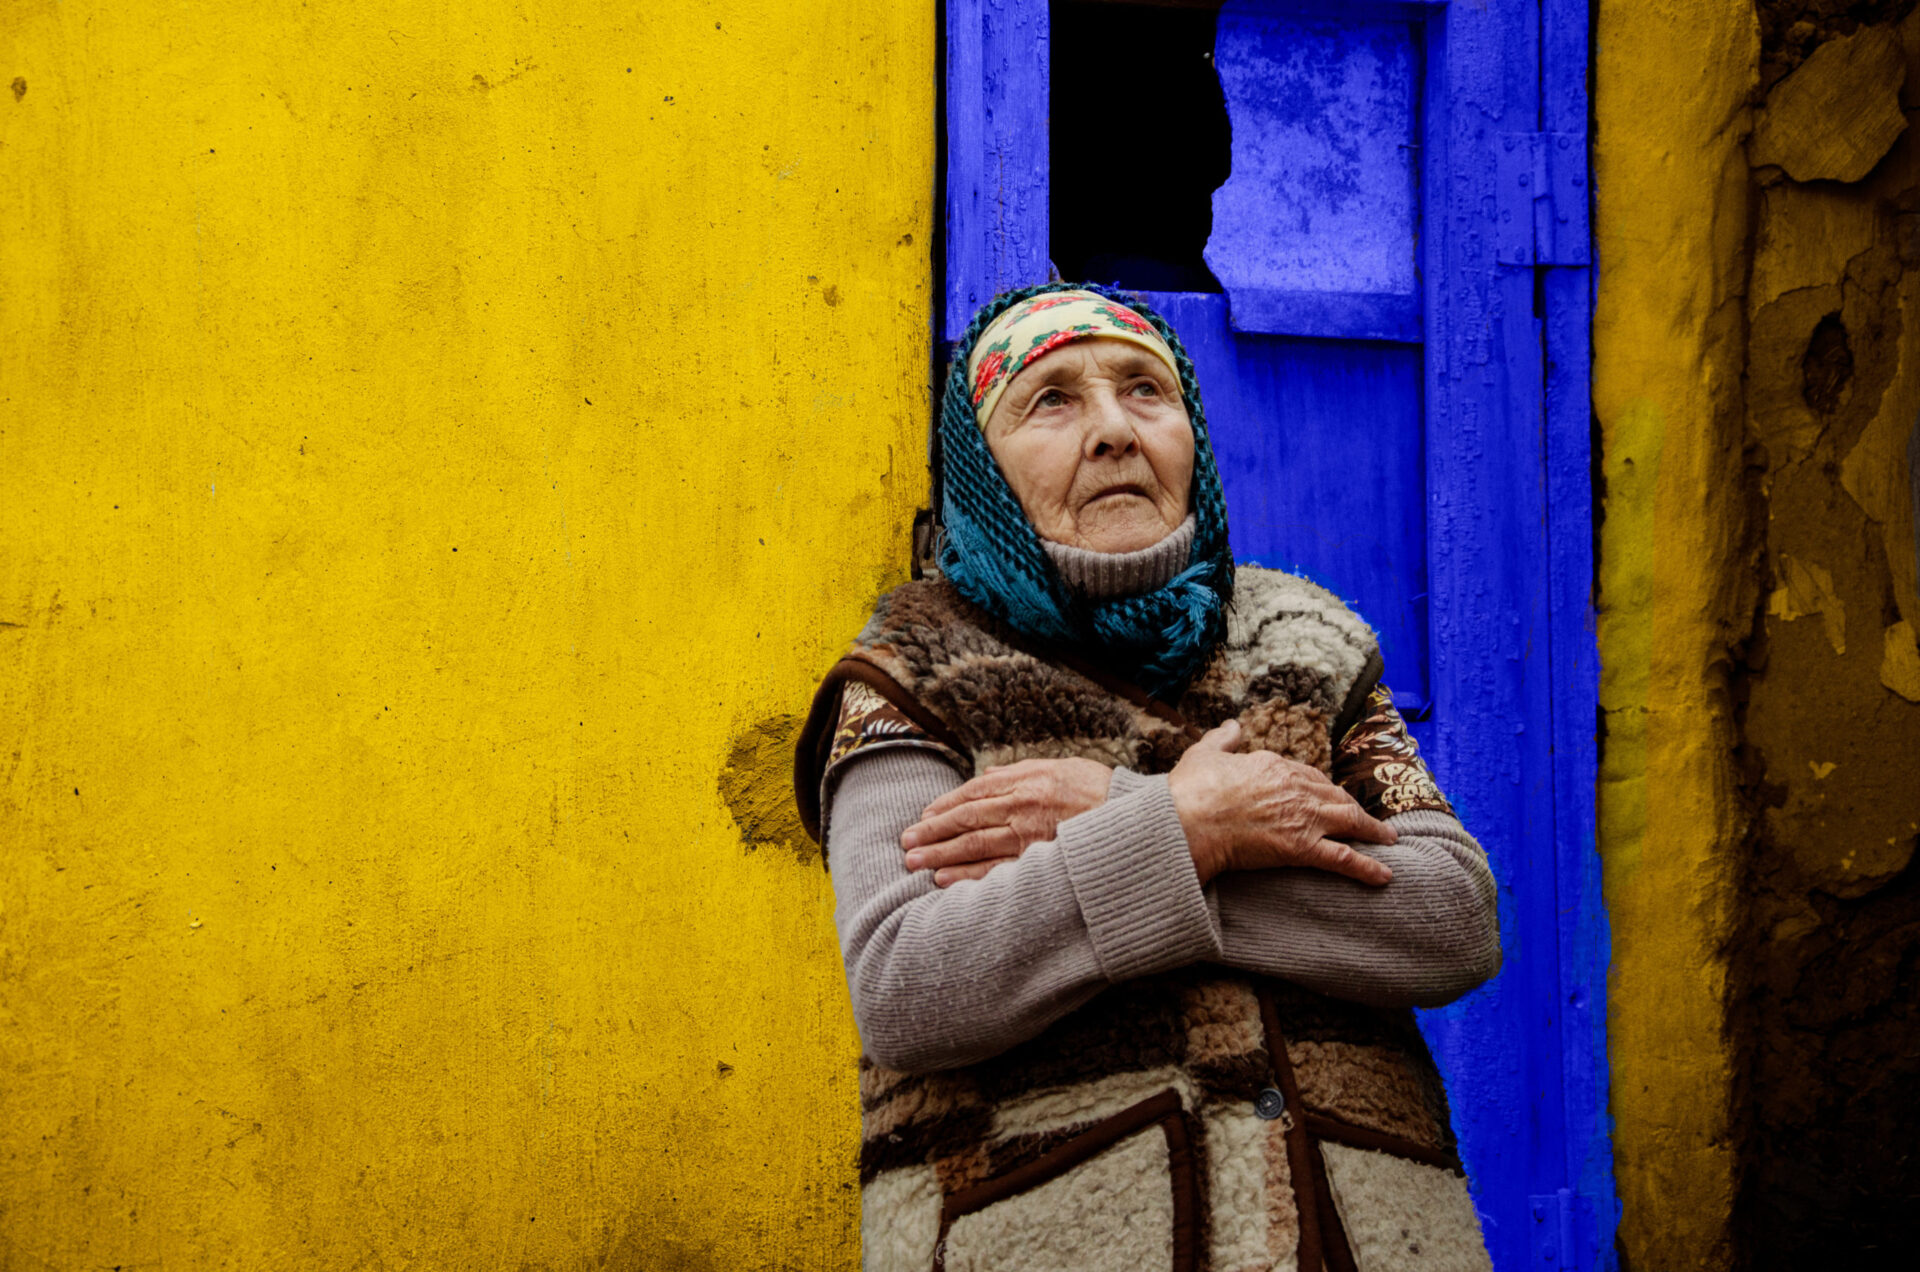 An old grandmother in the background of a yellow slum. Poor area